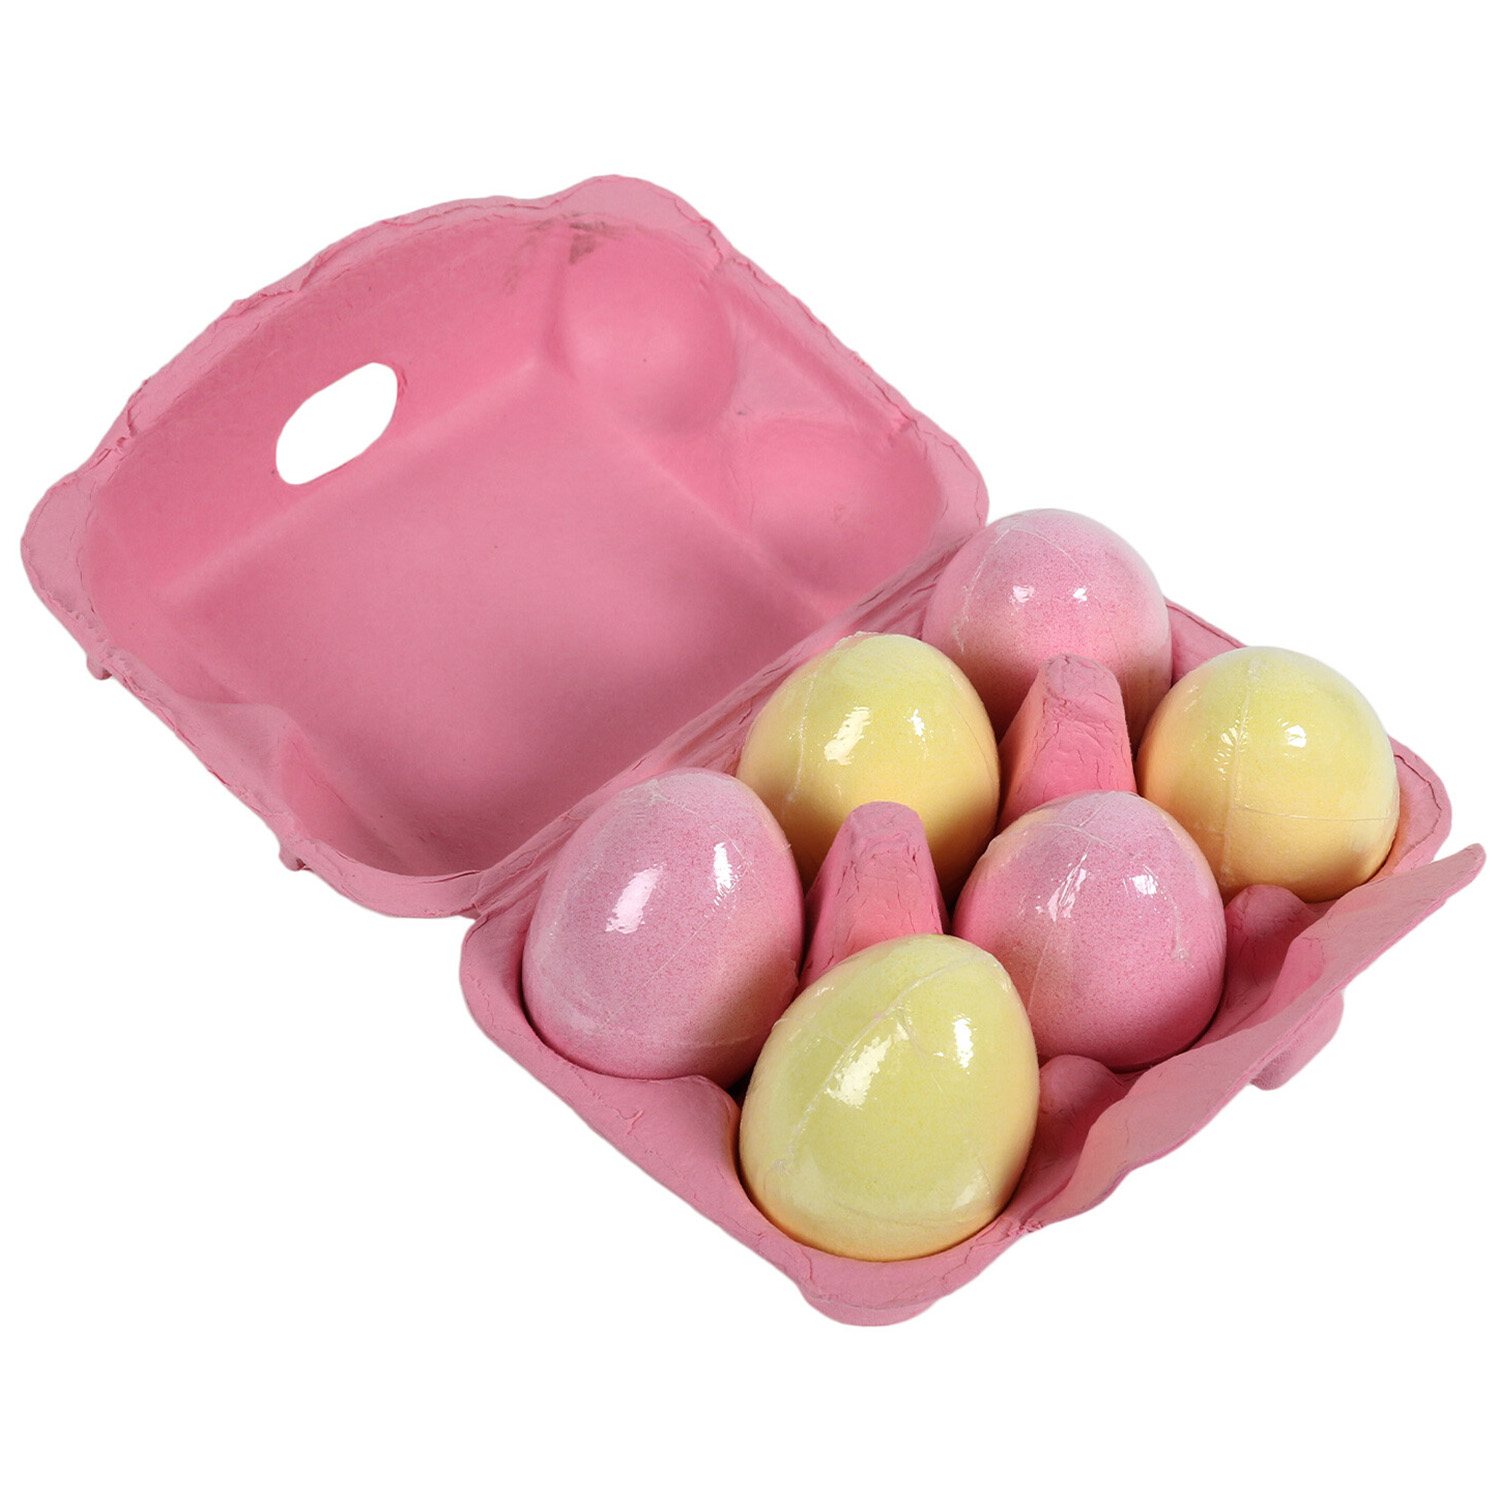 Pack of 6 Egg Bath Fizzers - Pink Image 2